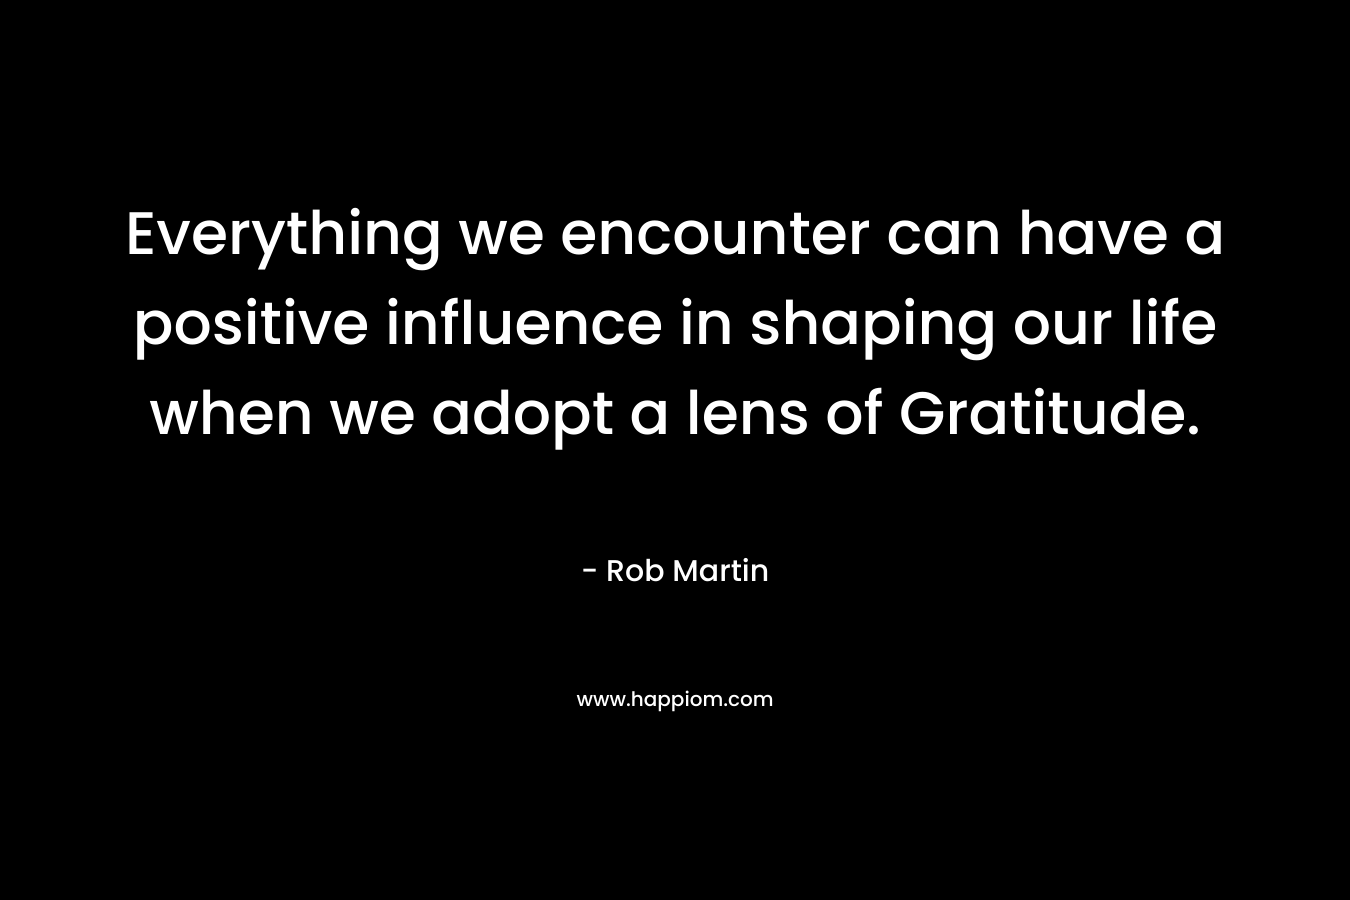 Everything we encounter can have a positive influence in shaping our life when we adopt a lens of Gratitude.